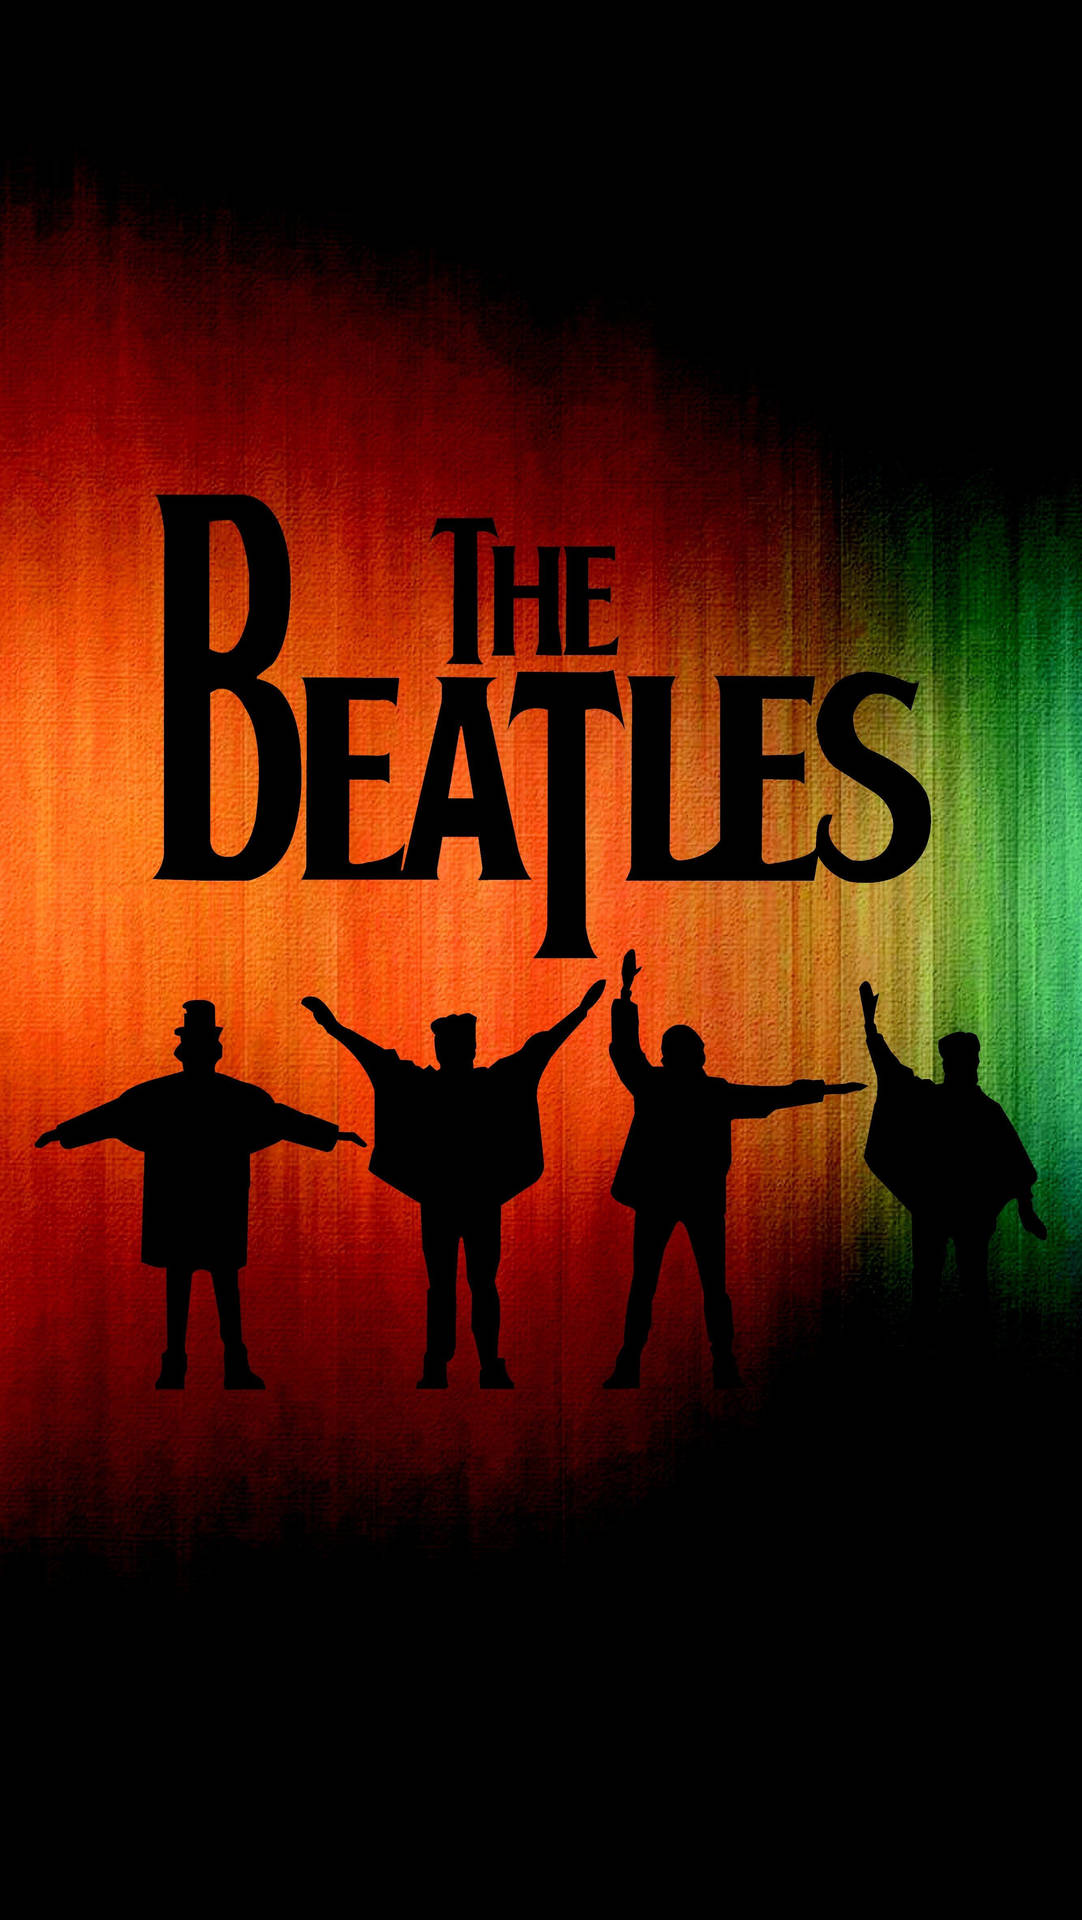 The Beatles Silhouette Art Background